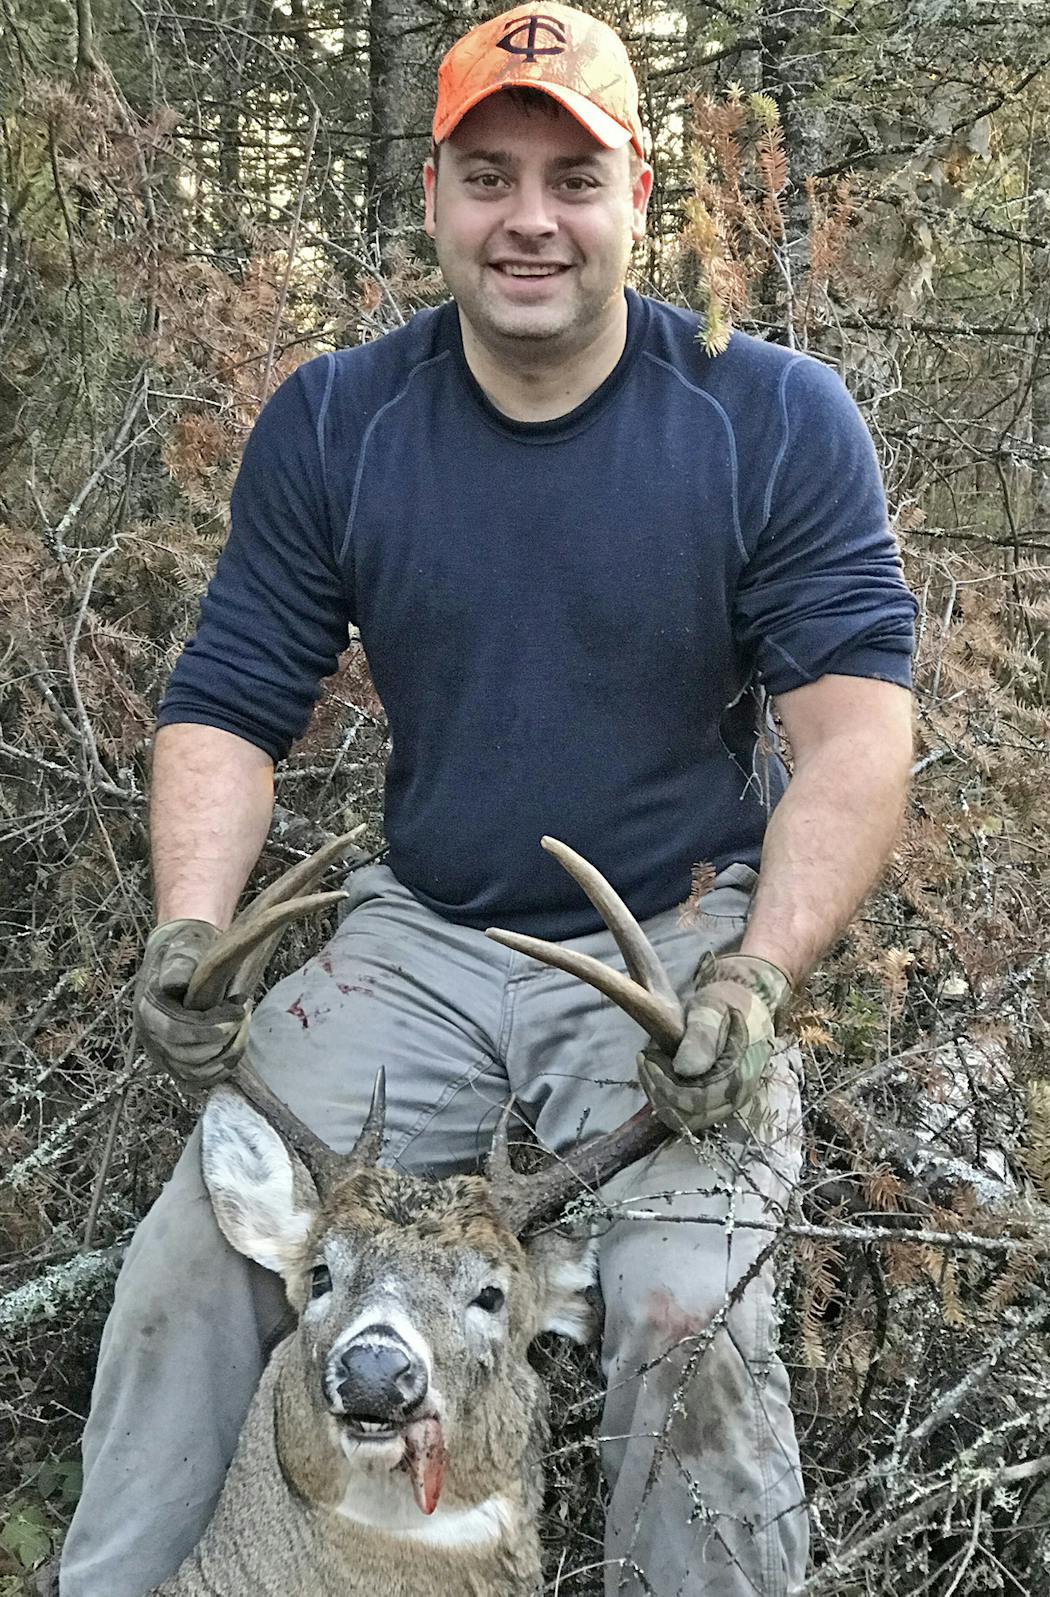 Jason Brown, 38, of Blaine hunts the Arrowhead Country west of Ely and is regularly joined there in deer season by his dad, Curt Brown, 64, of Roseville. This hefty 8-pointer showed himself in a clear-cut.